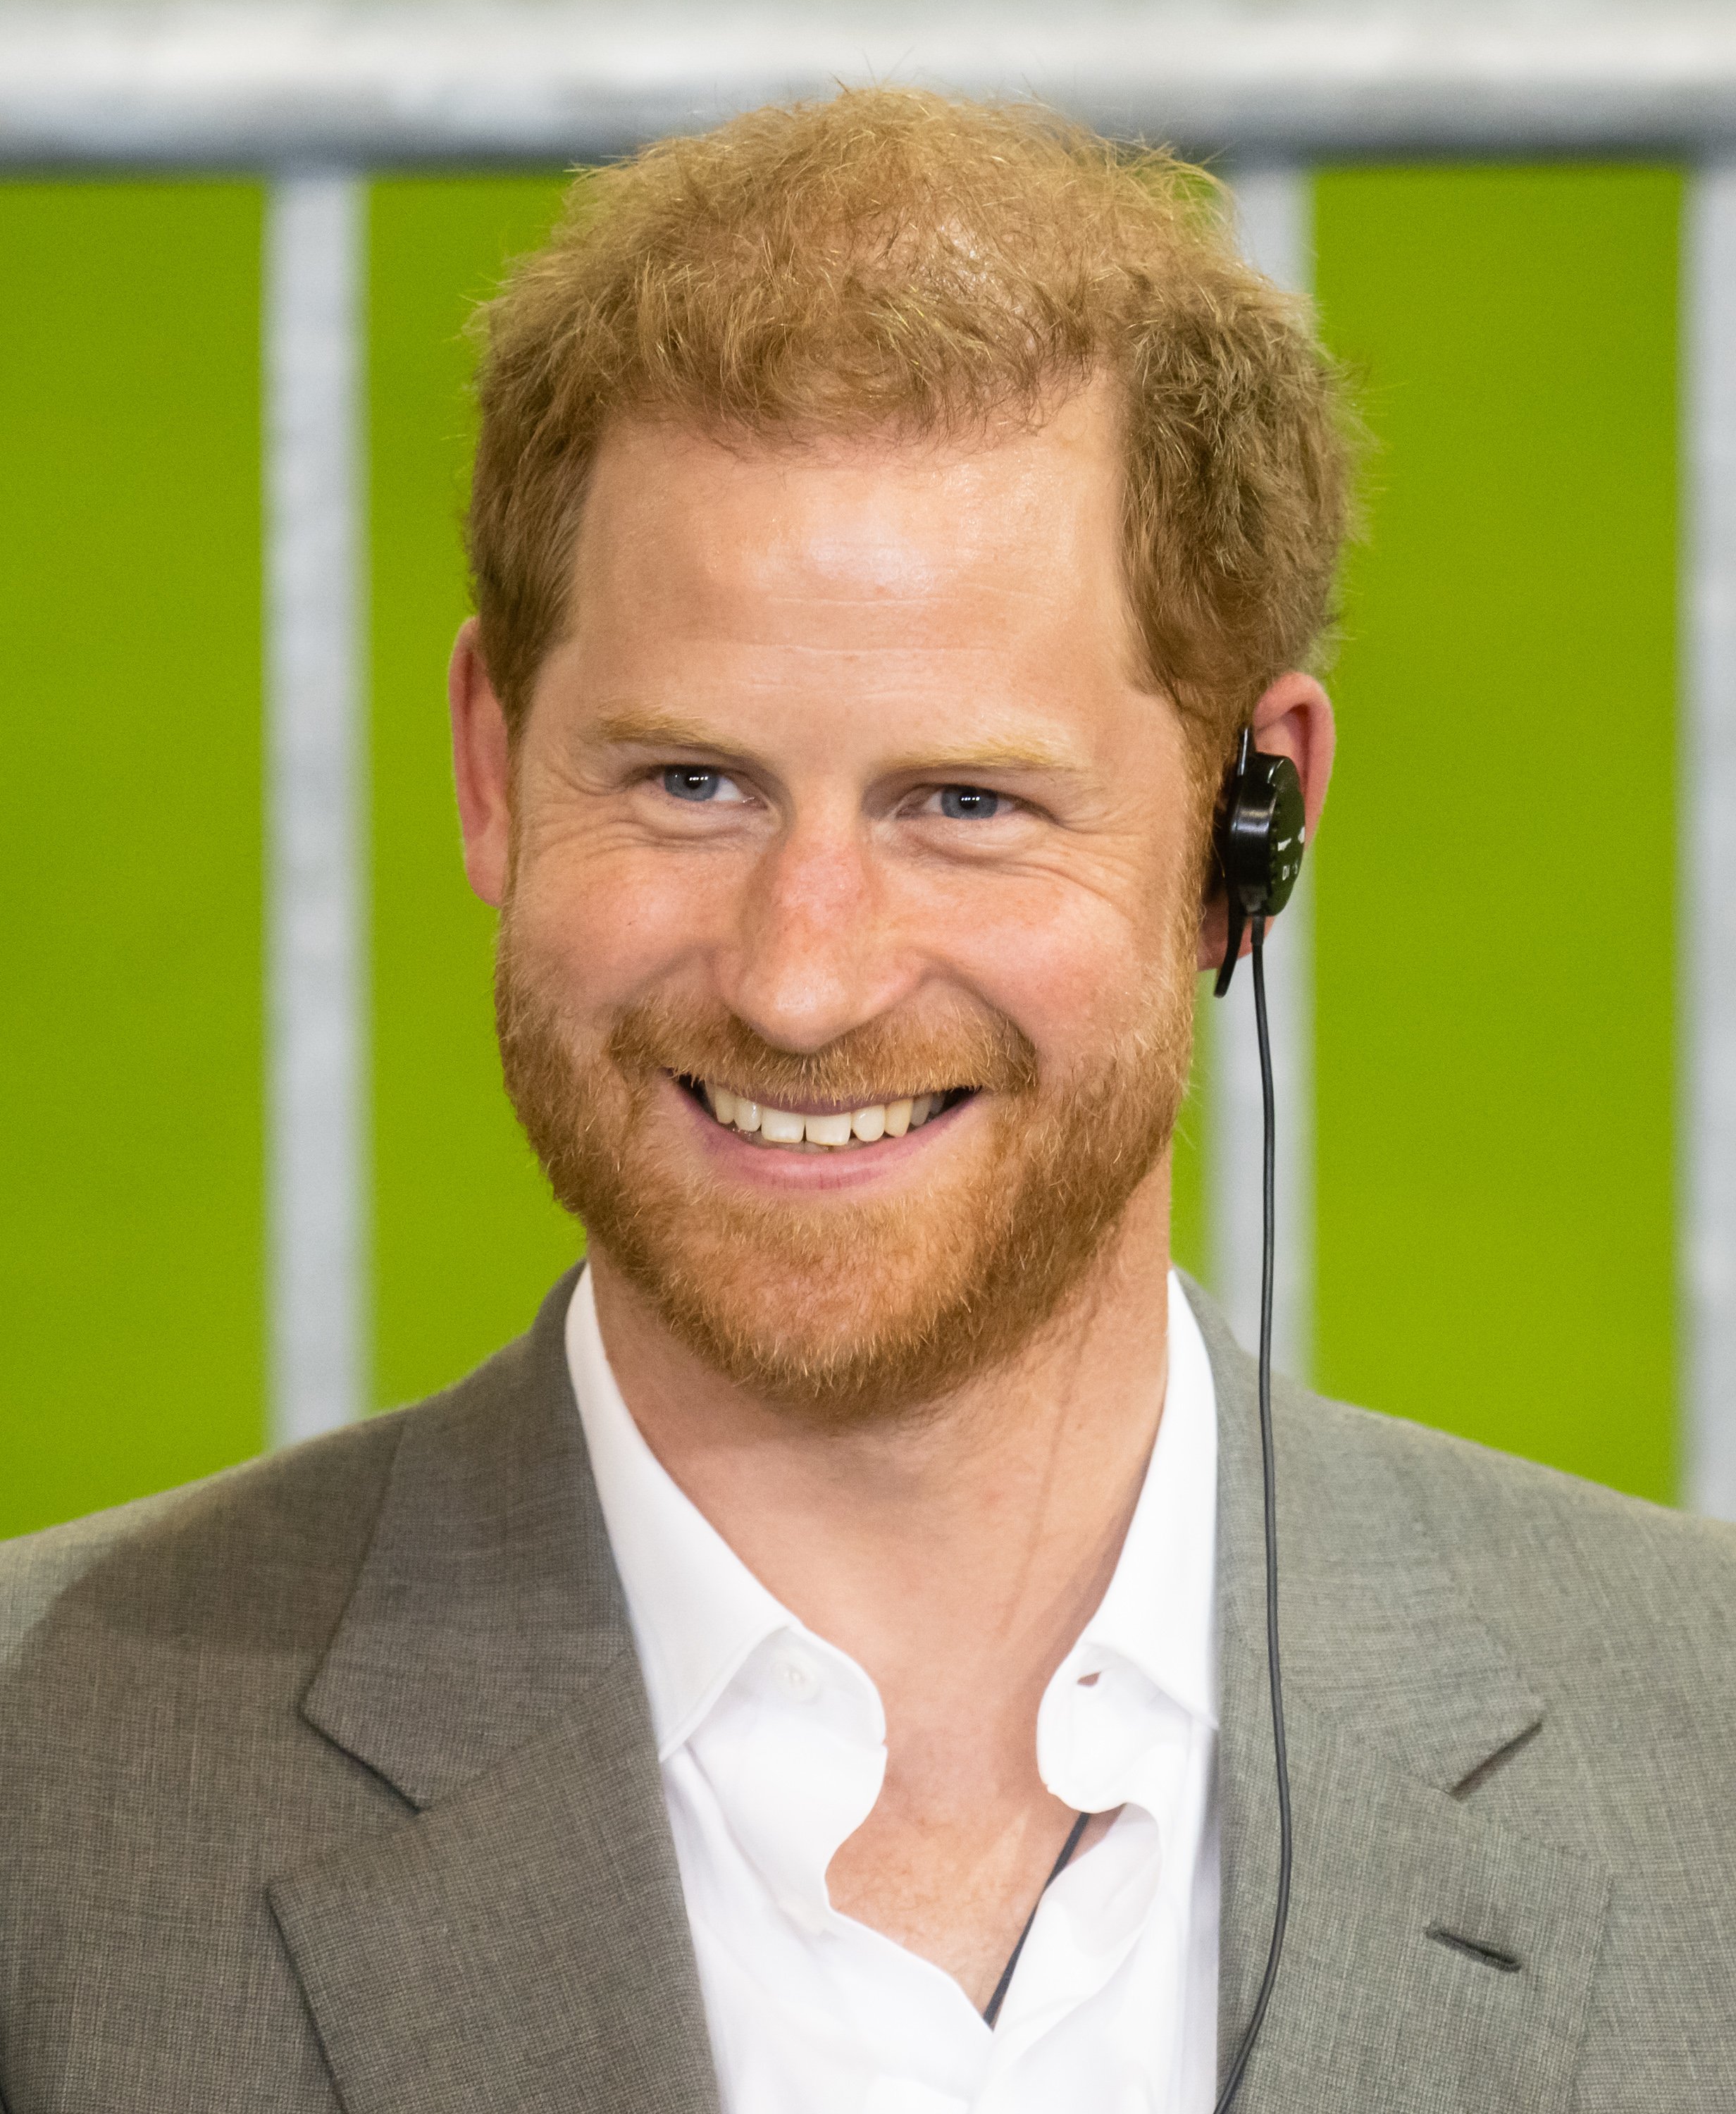 Prince Harry, Duke of Sussex at the Invictus Games Dusseldorf 2023 on September 06, 2022 in Dusseldorf, Germany. | Source: Getty Images